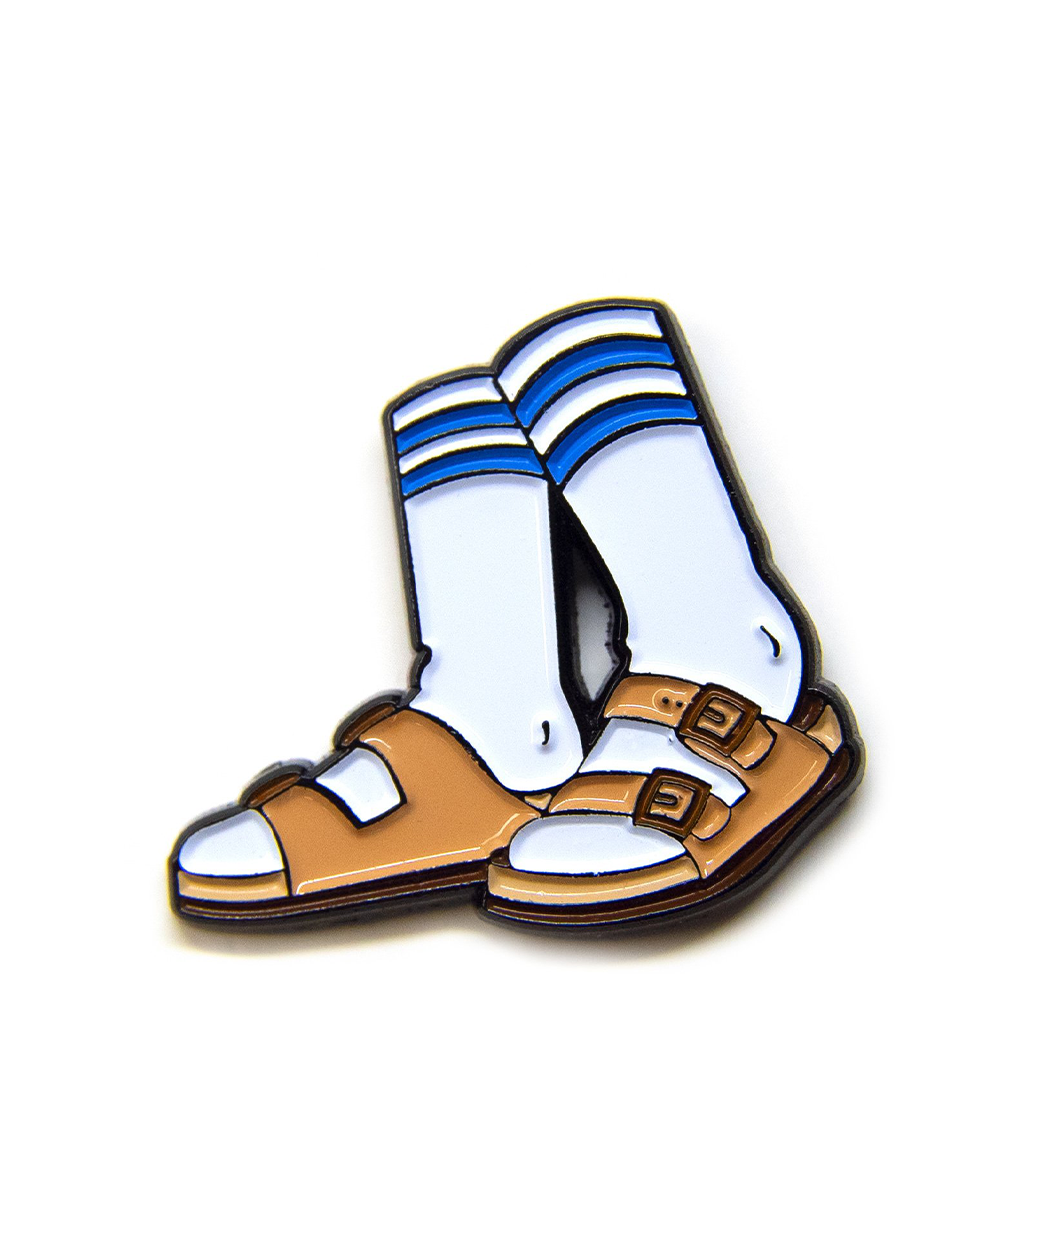 An enamel pin with a black backing of white tube socks with blue stripes in tan Birkenstocks sandals.